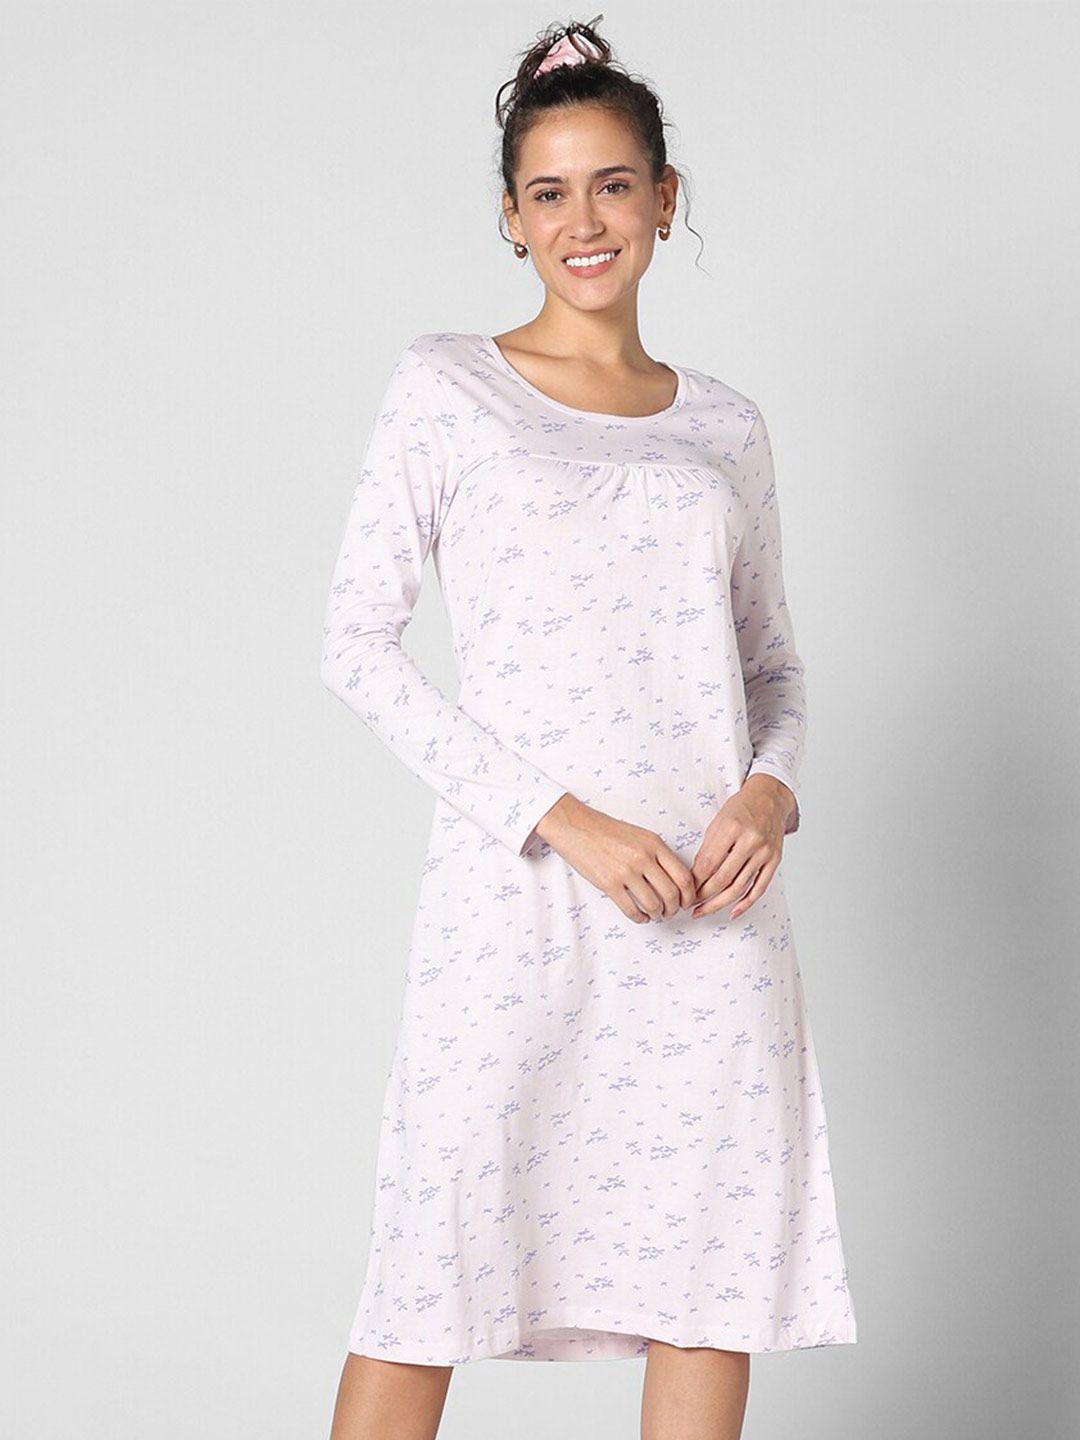 dreamz-by-pantaloons-floral-printed-pure-cotton-t-shirt-nightdress